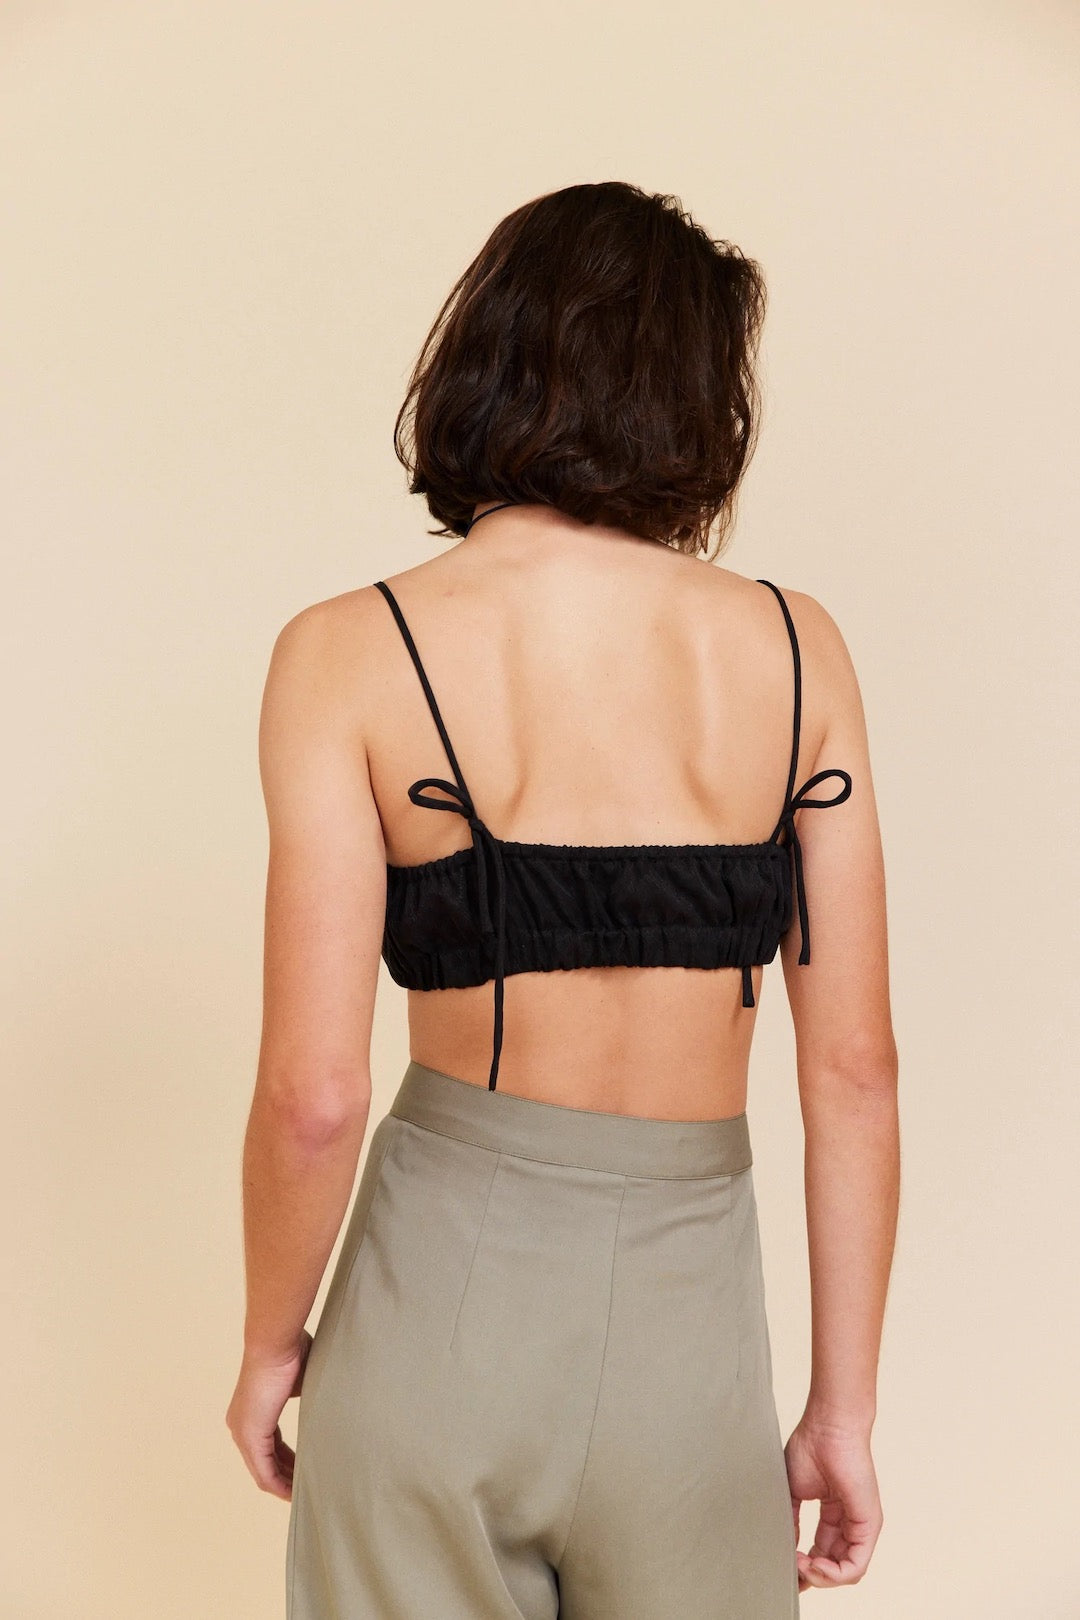 The back view of a woman wearing a OVNA OVICH Little Joy Bralette – Onyx and khaki pants.